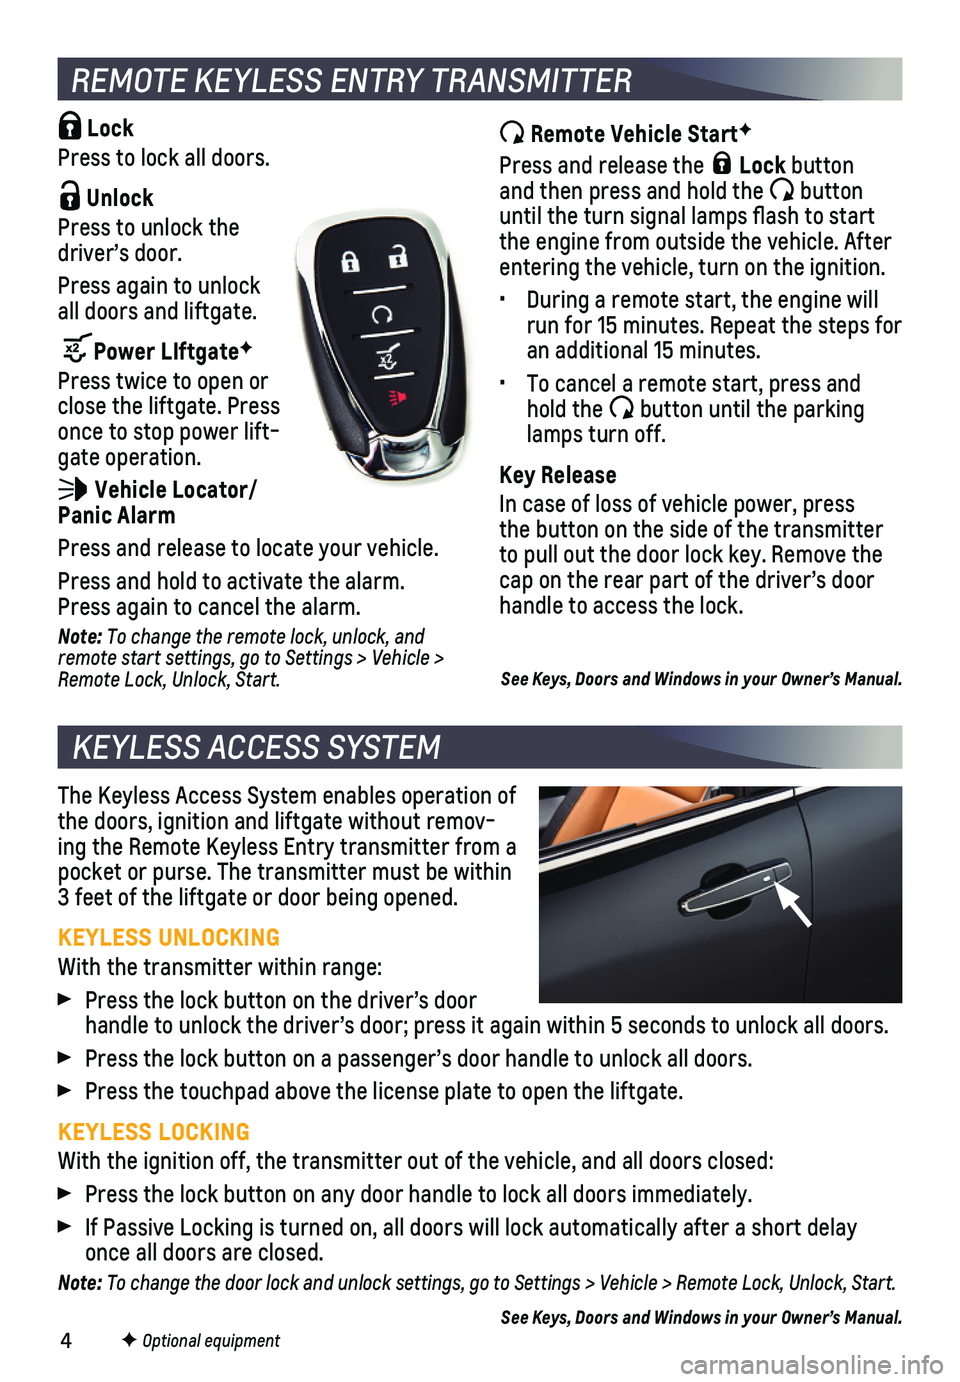 CHEVROLET EQUINOX 2019  Get To Know Guide 4
The Keyless Access System enables operation of the doors, ignition and liftgate without remov-ing the Remote Keyless Entry transmitter from a pocket or purse. The transmitter must be within  3 feet 